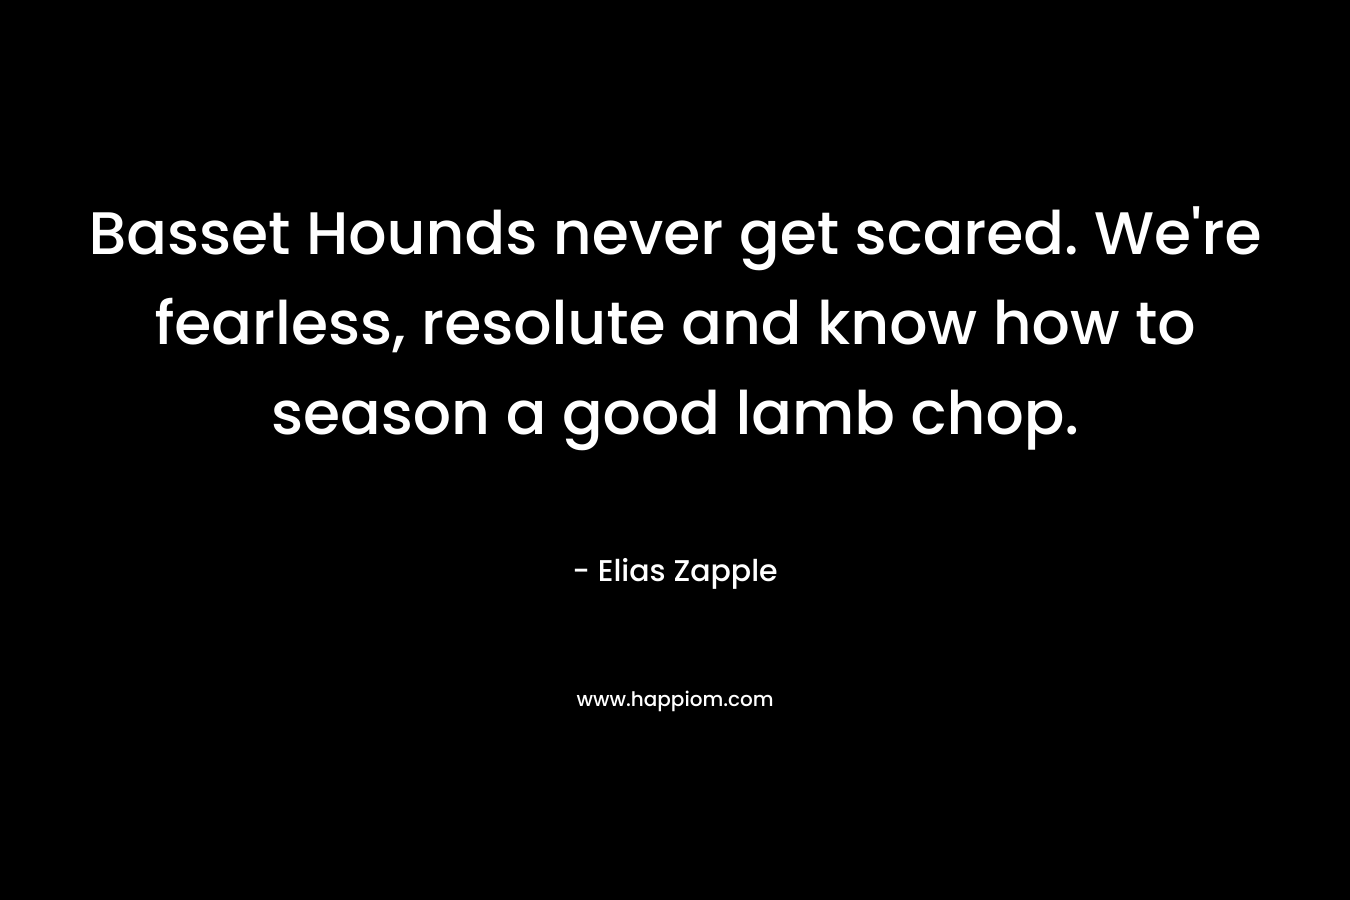 Basset Hounds never get scared. We’re fearless, resolute and know how to season a good lamb chop. – Elias Zapple